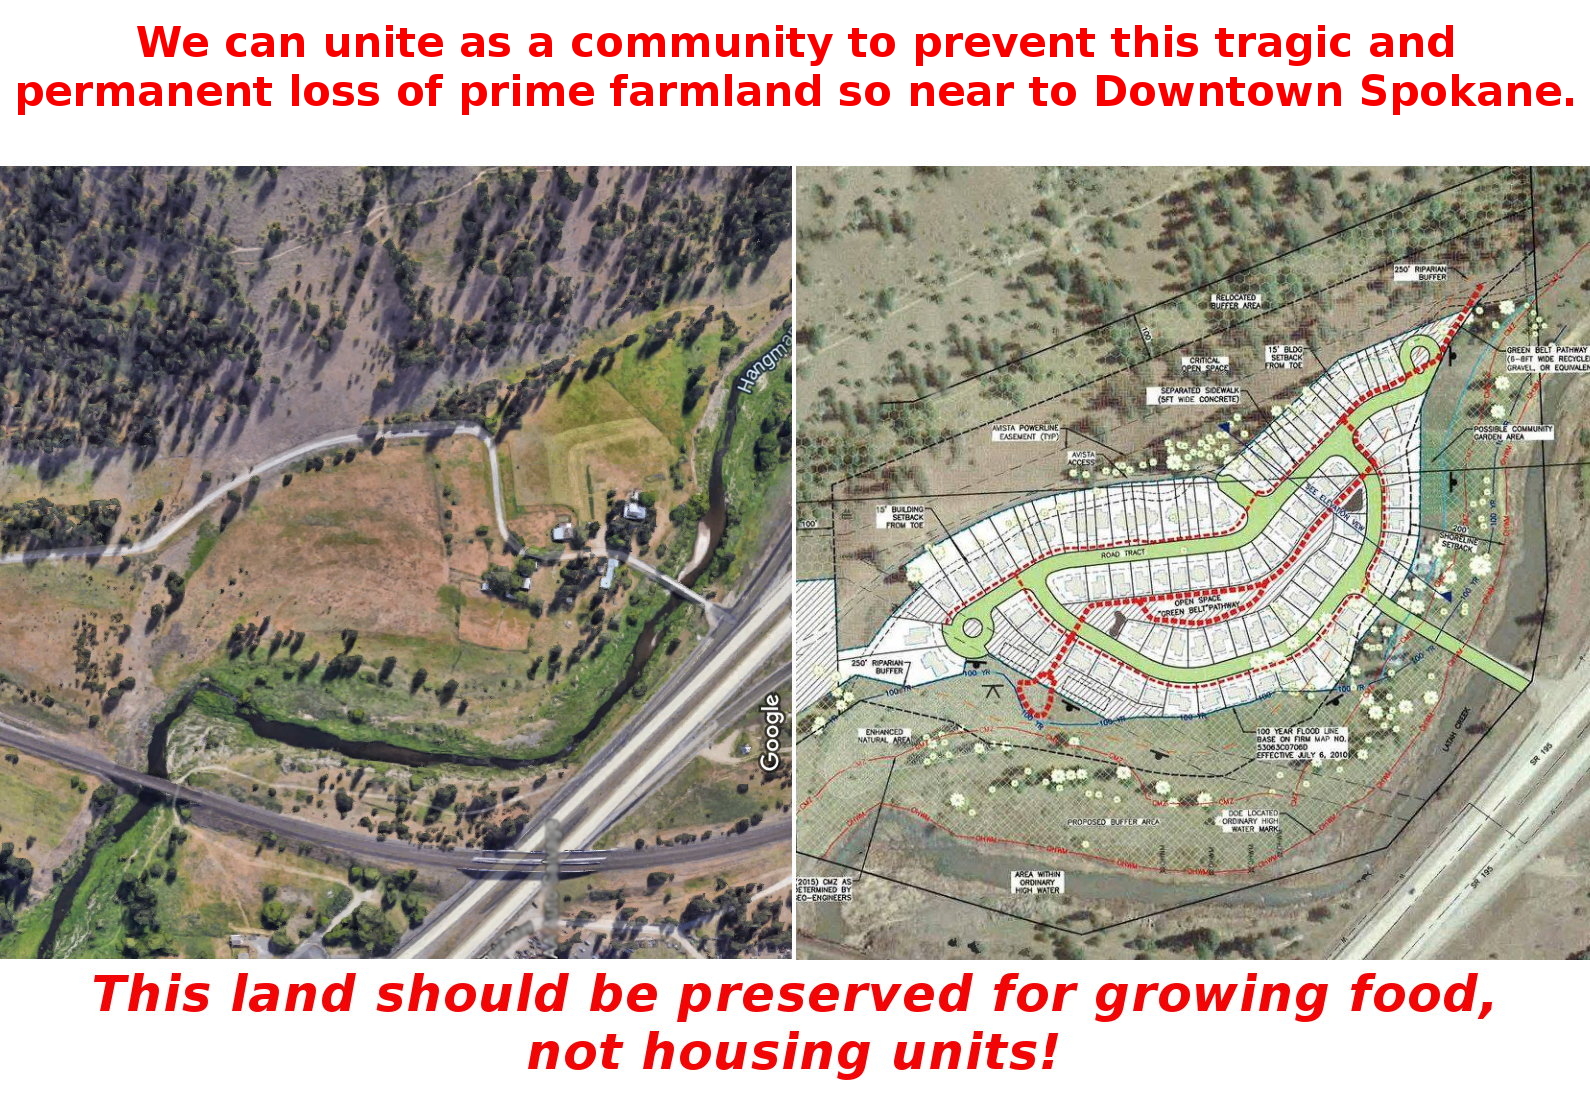 Side by side picture of farmland and the development plans.